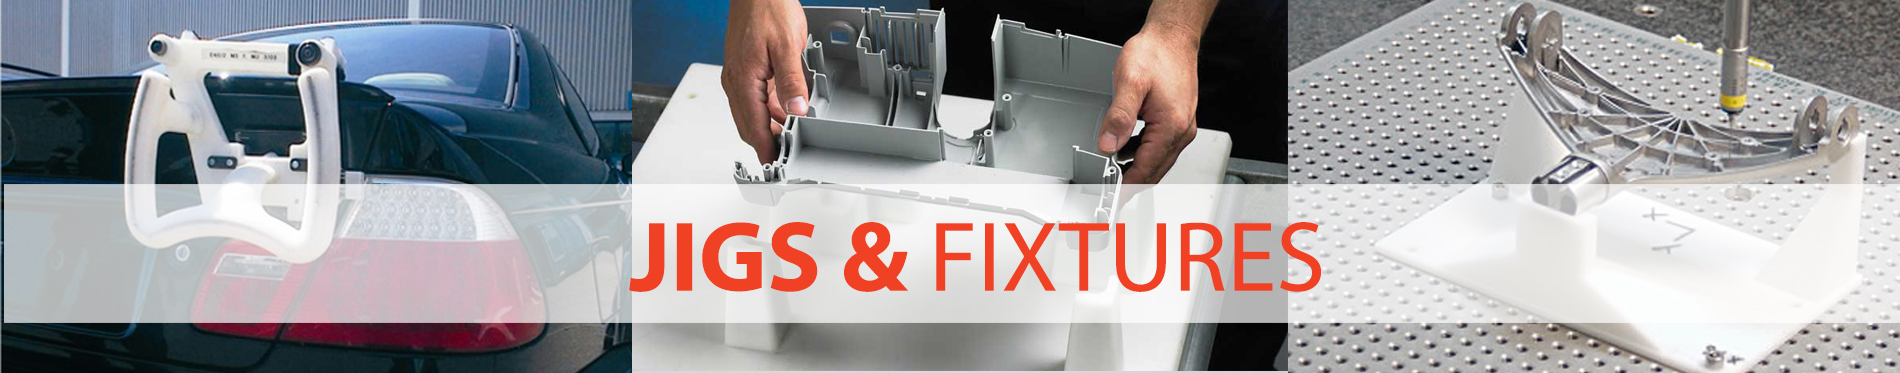 Jigs and fixtures